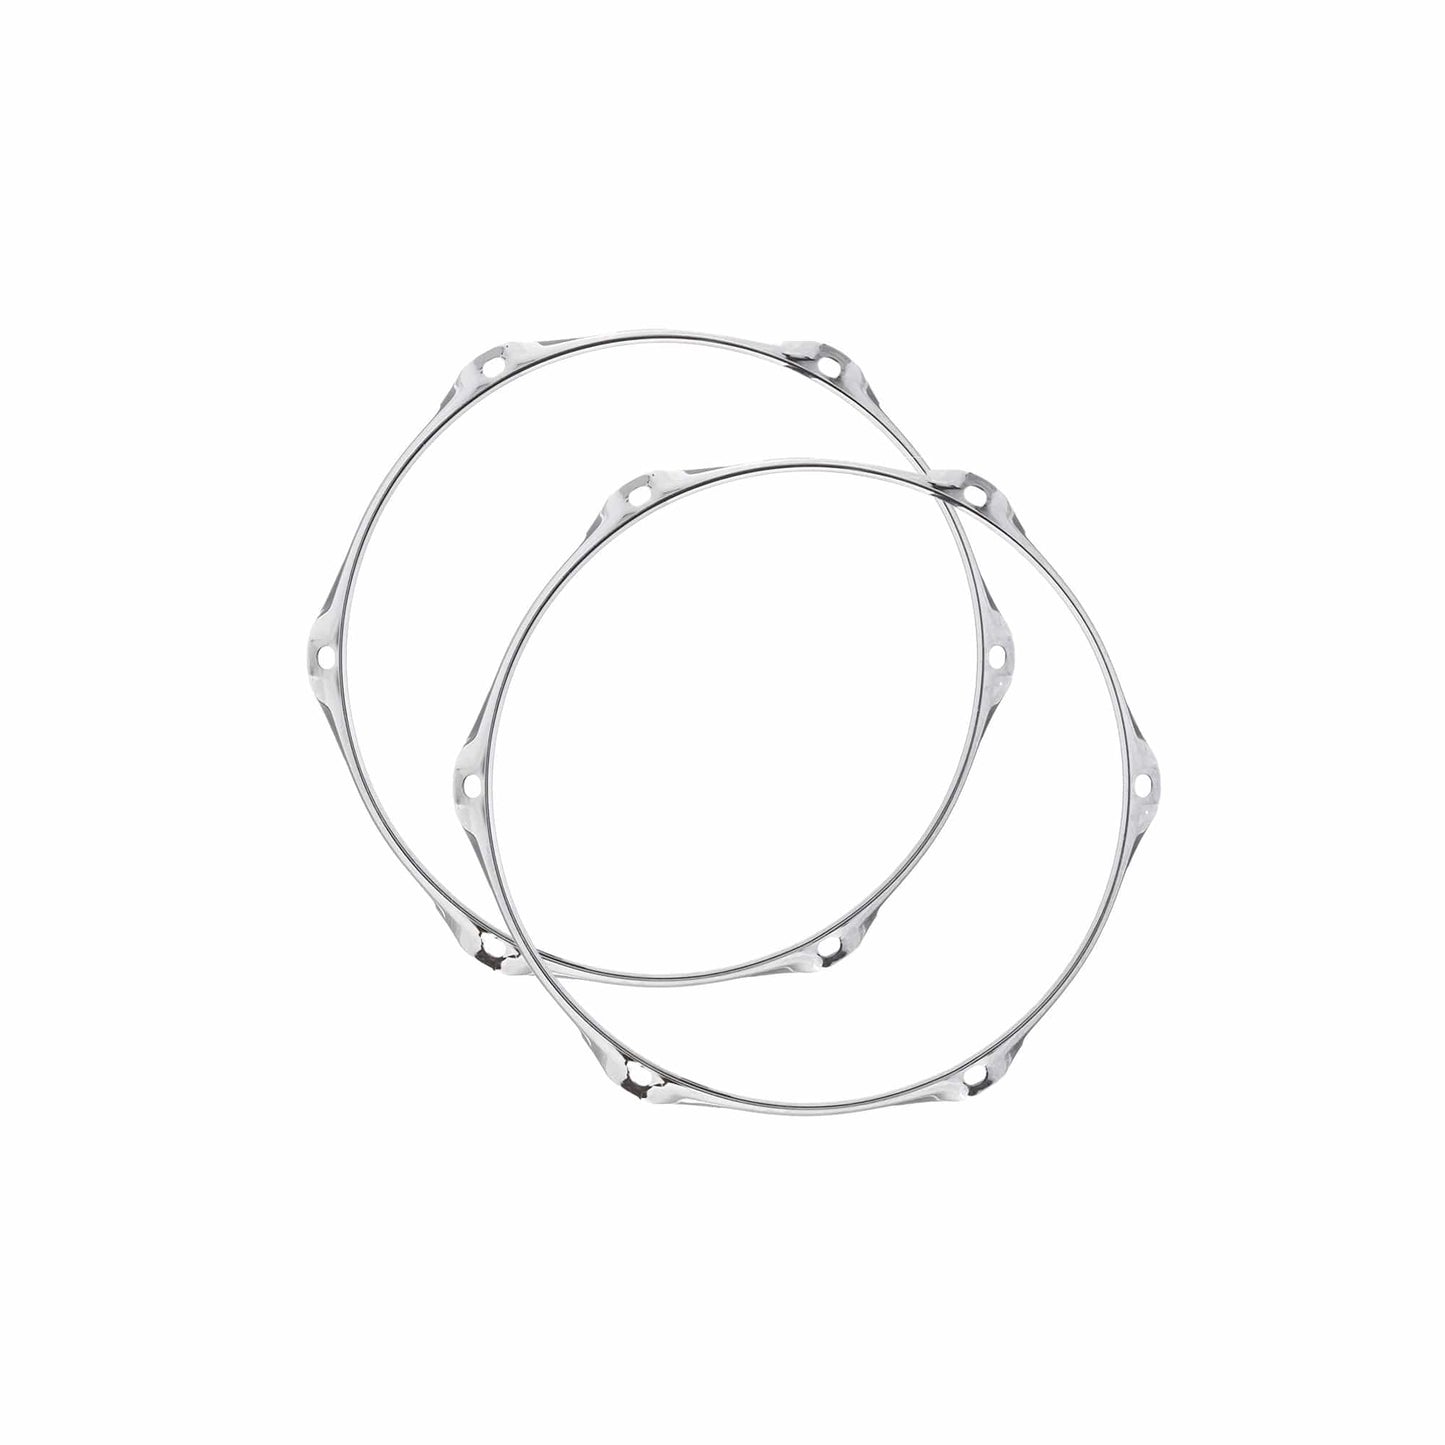 Gibraltar 10" 6 Lug 2.3mm Steel Hoop (2 Pack Bundle) Drums and Percussion / Parts and Accessories / Drum Parts